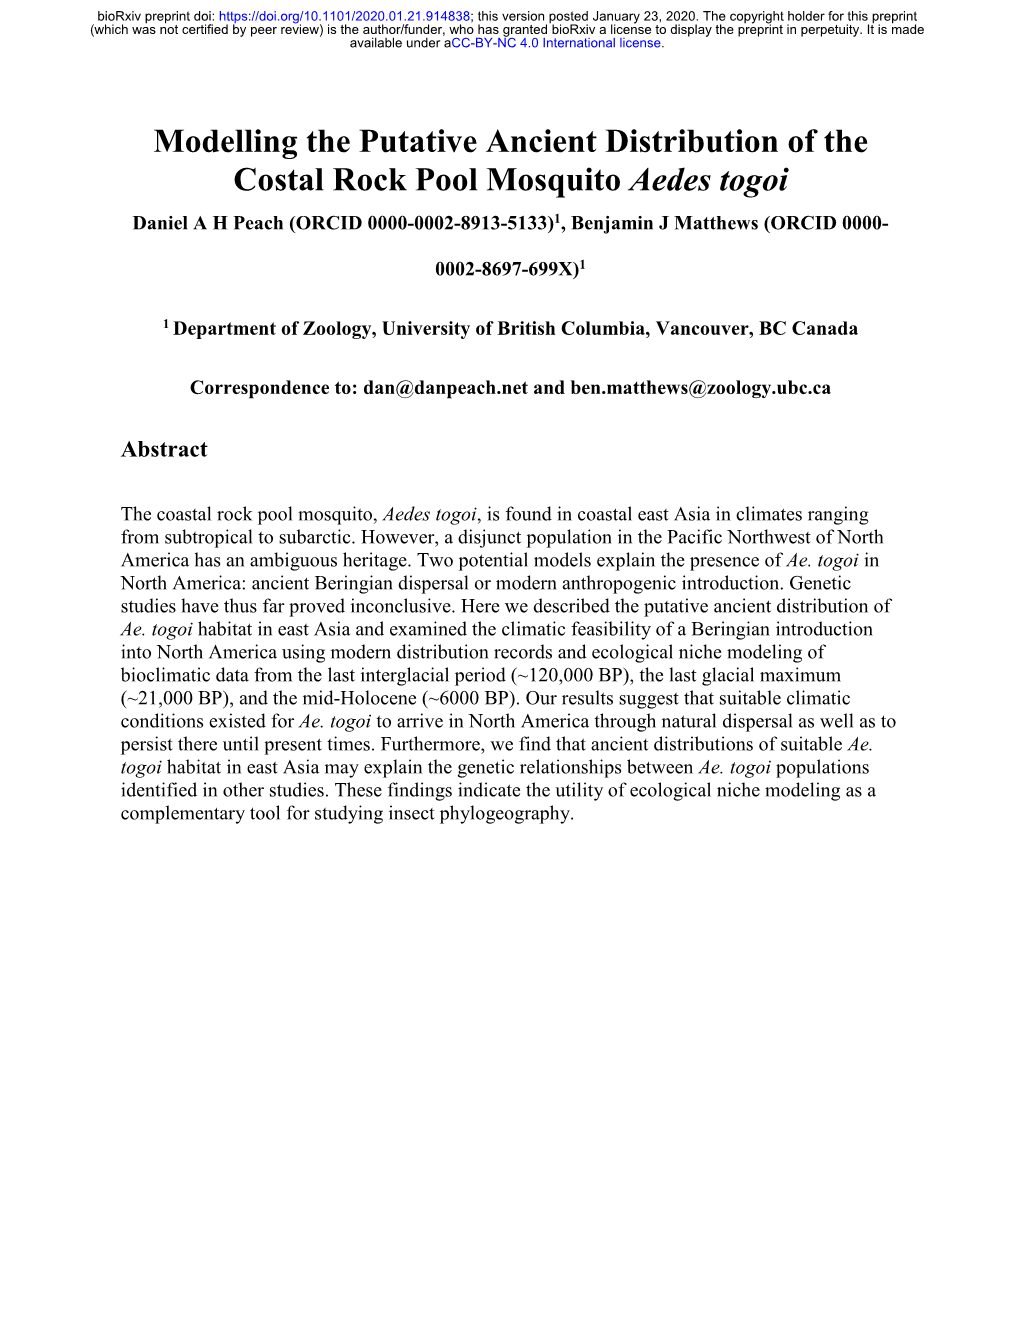 Modelling the Putative Ancient Distribution of the Costal Rock Pool